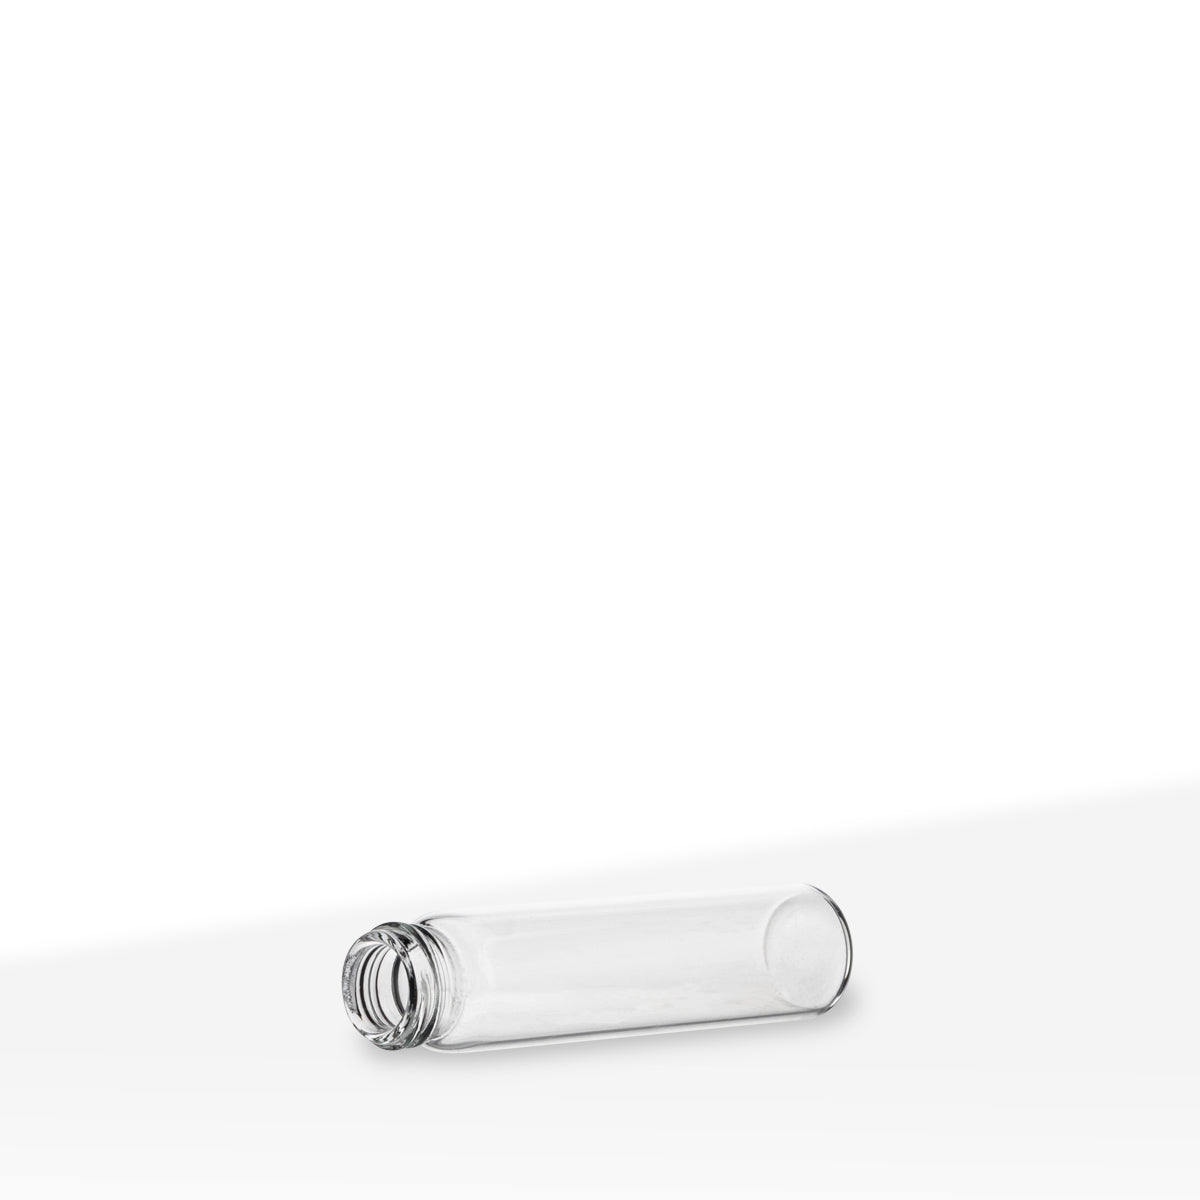 Glass Vial | Clear Glass Pre-Roll Tube | 15mm - 70mm - 371 Count